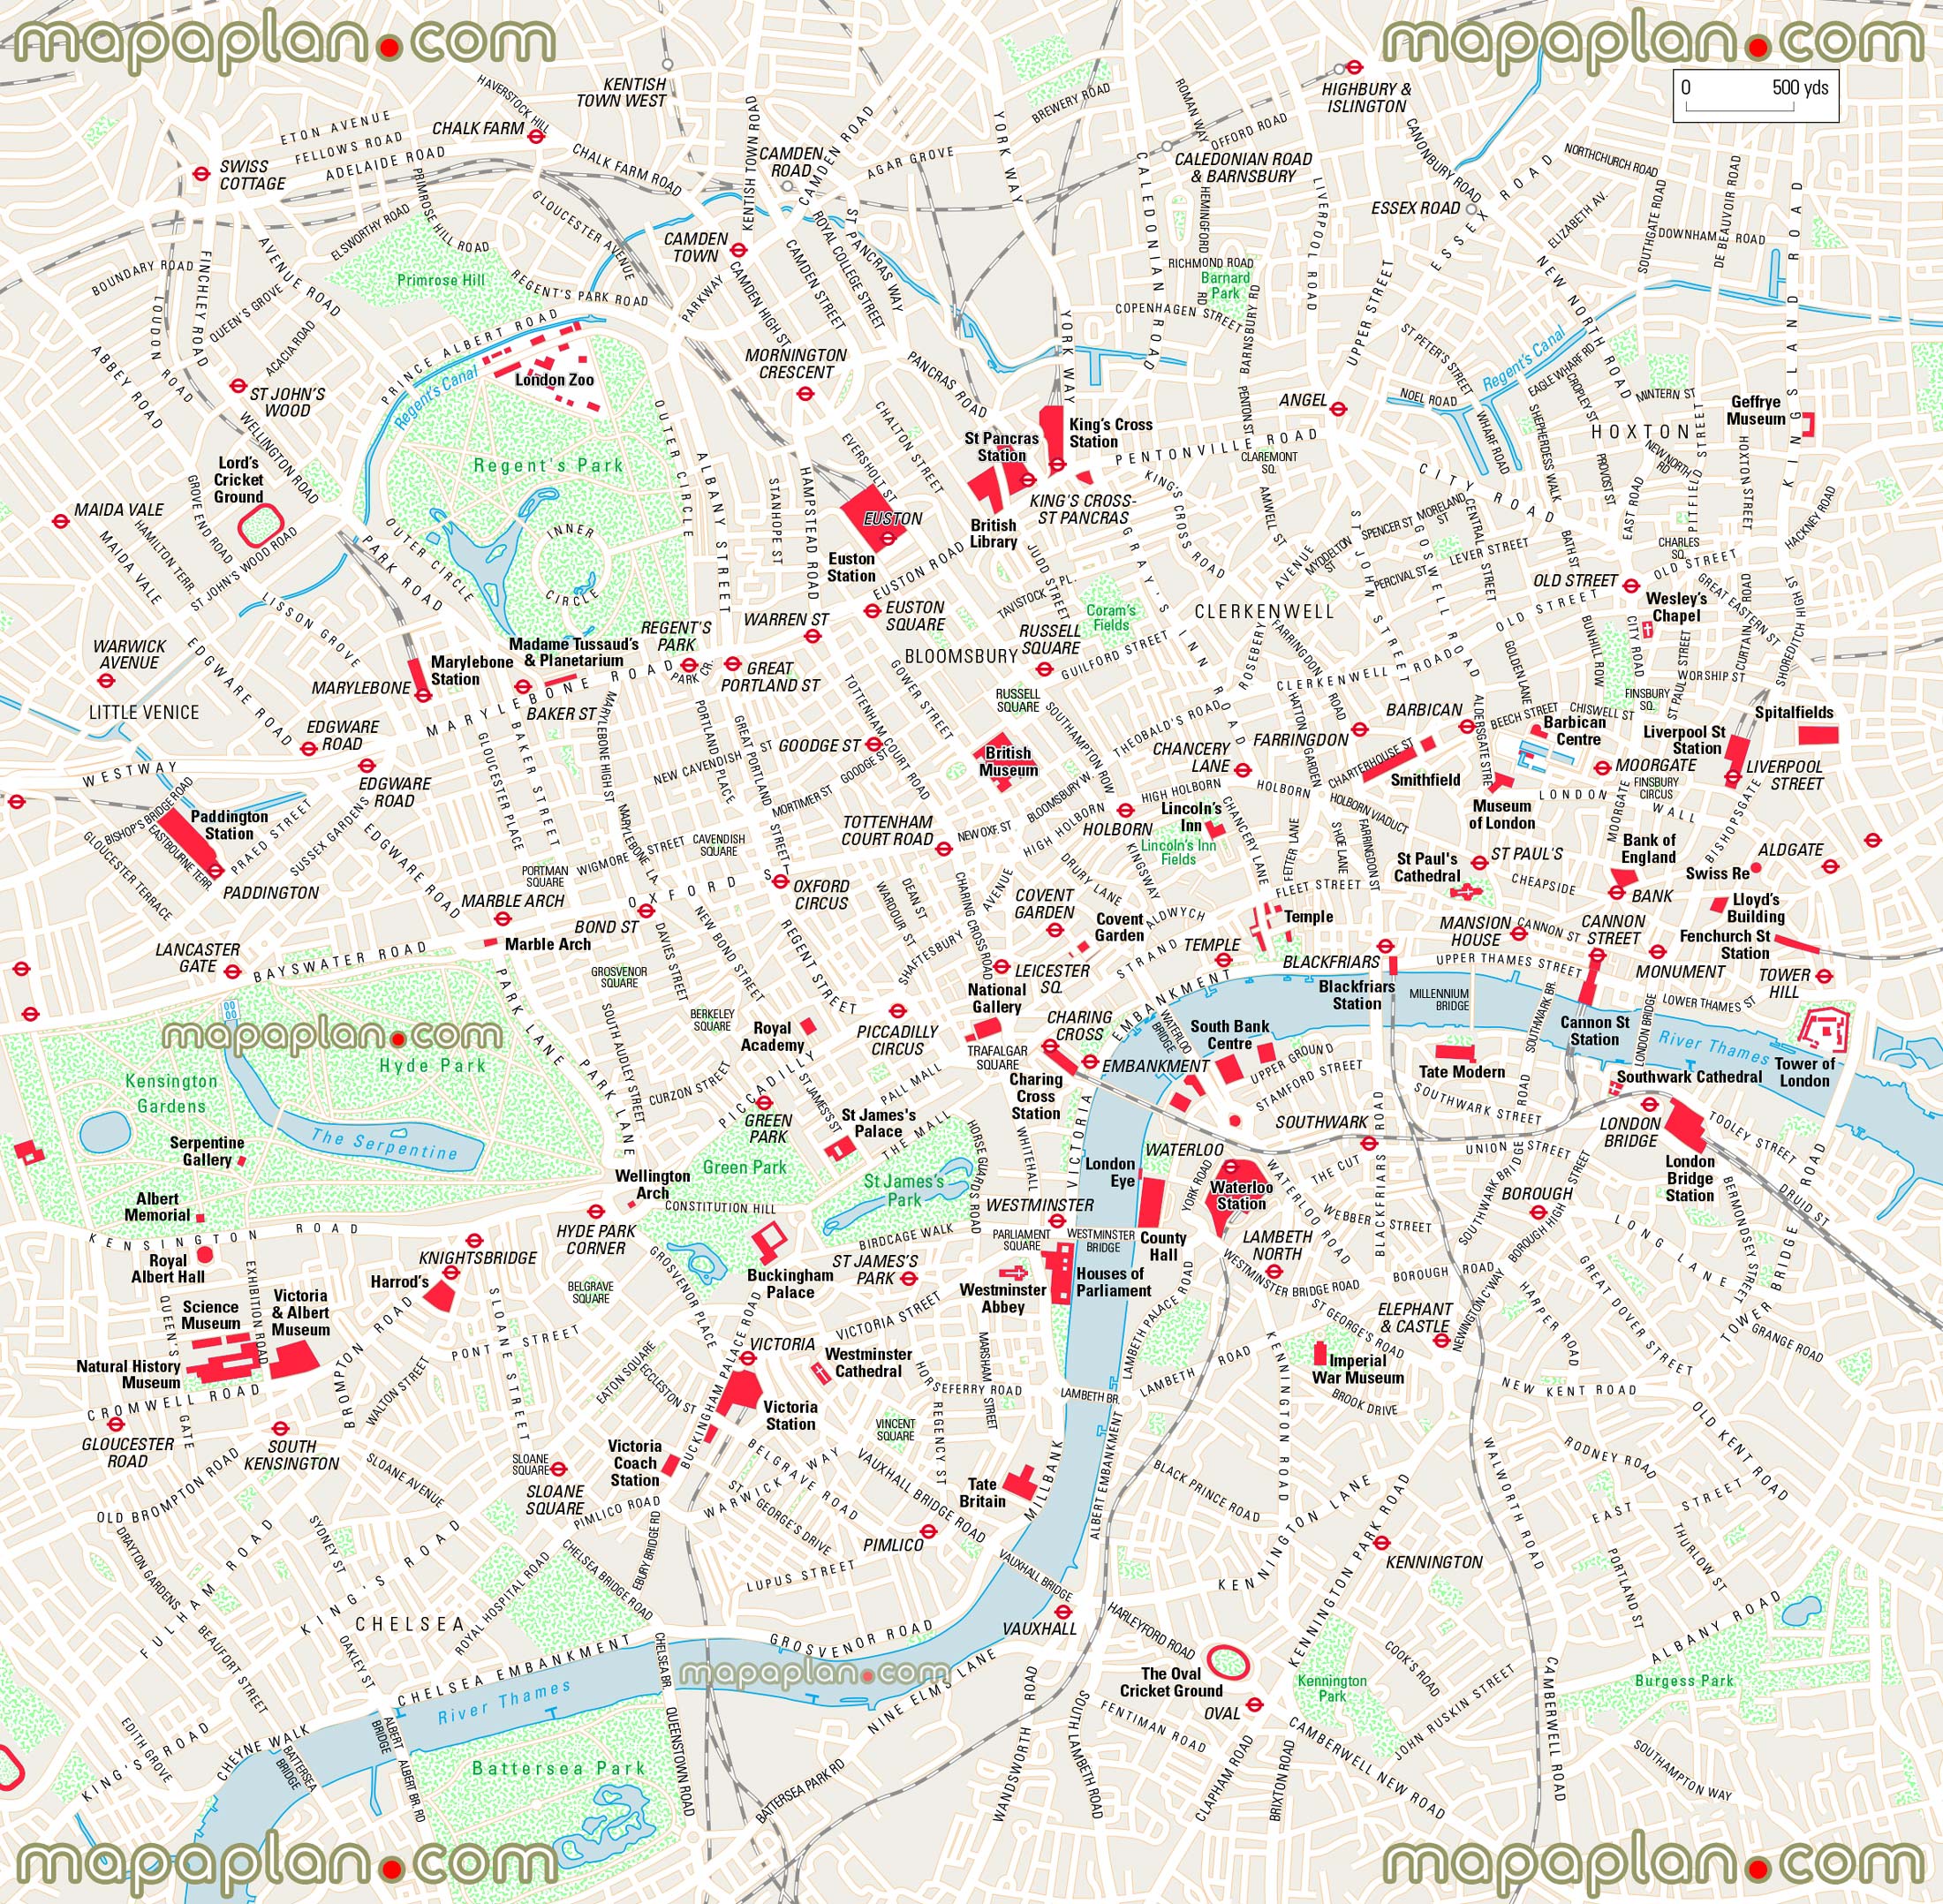 printable walking favourite points interest visit metro stations great historic spots detailed road guide street names plans London Top tourist attractions map